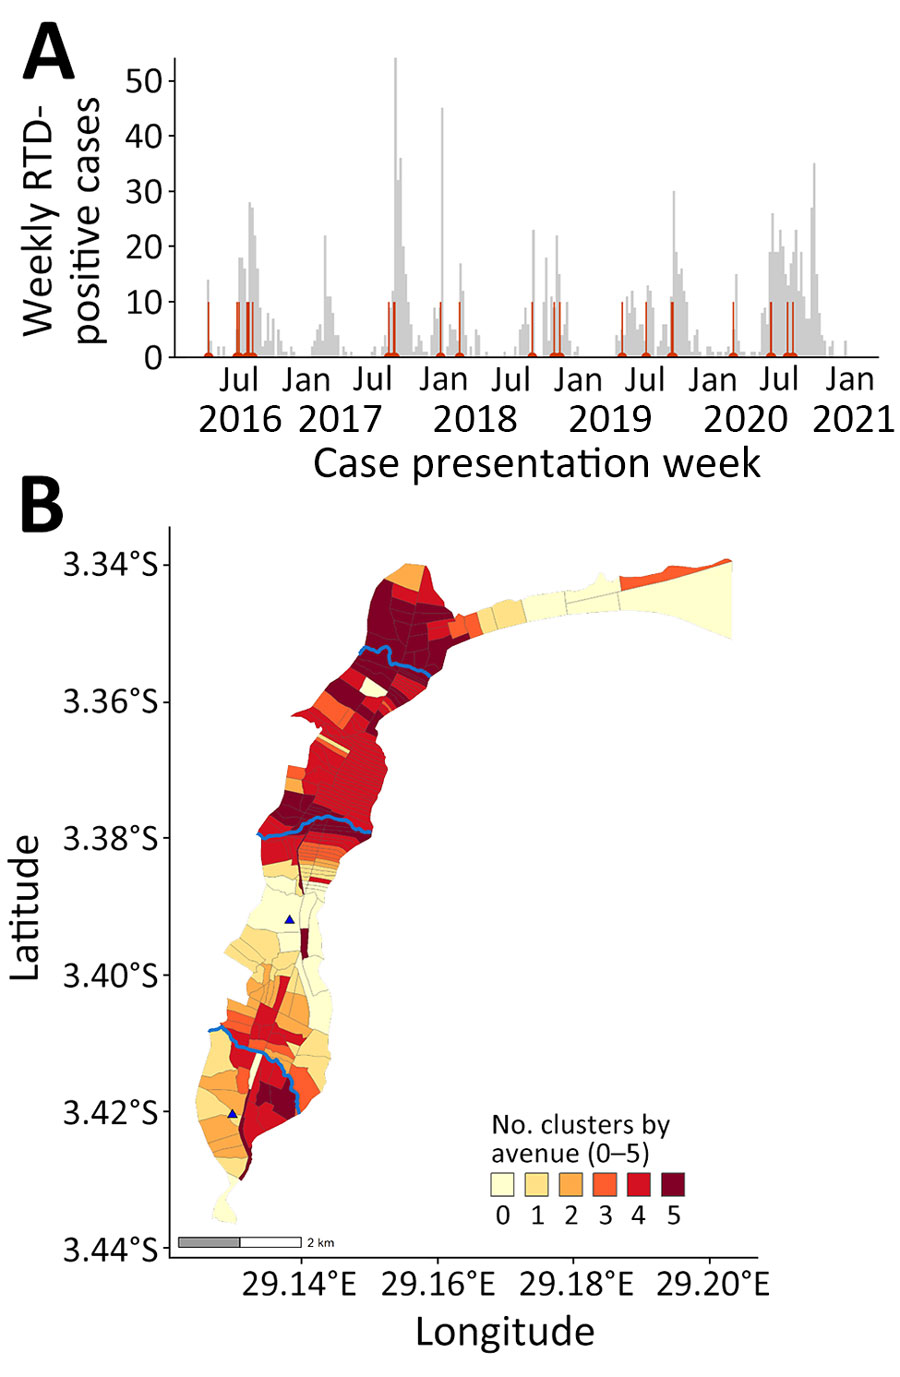 Epidemic curve and cluster persistence in study of spatiotemporal modeling of cholera, Uvira, Democratic Republic of the Congo, 2016−2020. A) Epidemic curve shows weekly numbers of RDT-positive cholera cases based on week of onset and start dates of 26 clusters (red vertical lines). B) Cluster persistence within avenues for RDT-positive cases showing the number of years affected by clustering within avenues and proximity to rivers (blue lines, top to bottom: Kalimabenge River, Mulongwe River, Kanvinvira River). Blue triangles indicate cholera treatment center (top) and unit (bottom). RDT, rapid diagnostic test.